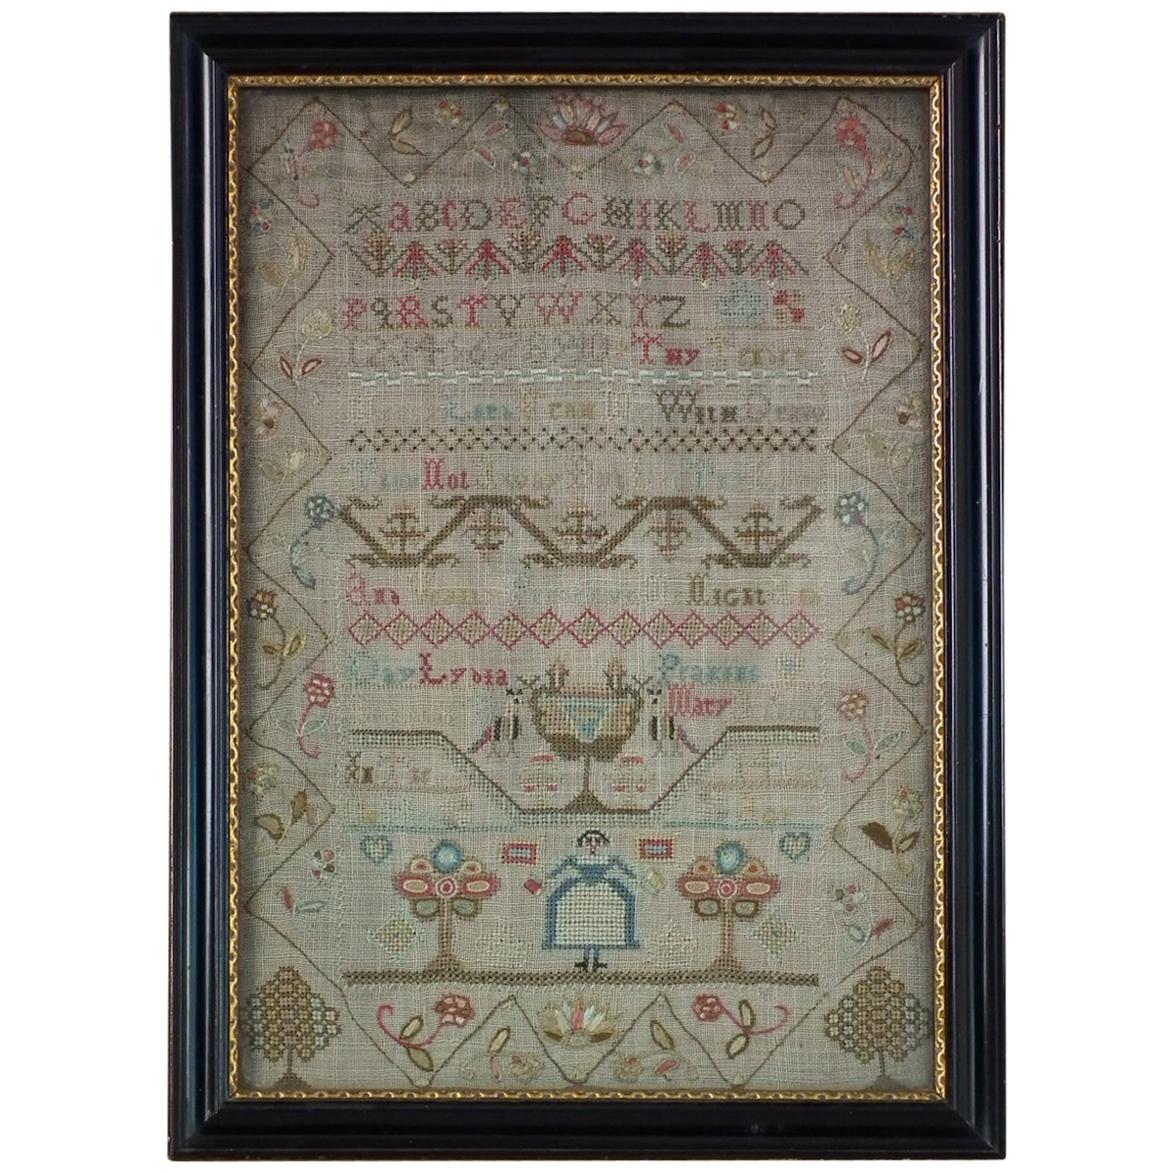 Small Antique Sampler, circa 1770, by Lydia Peakins